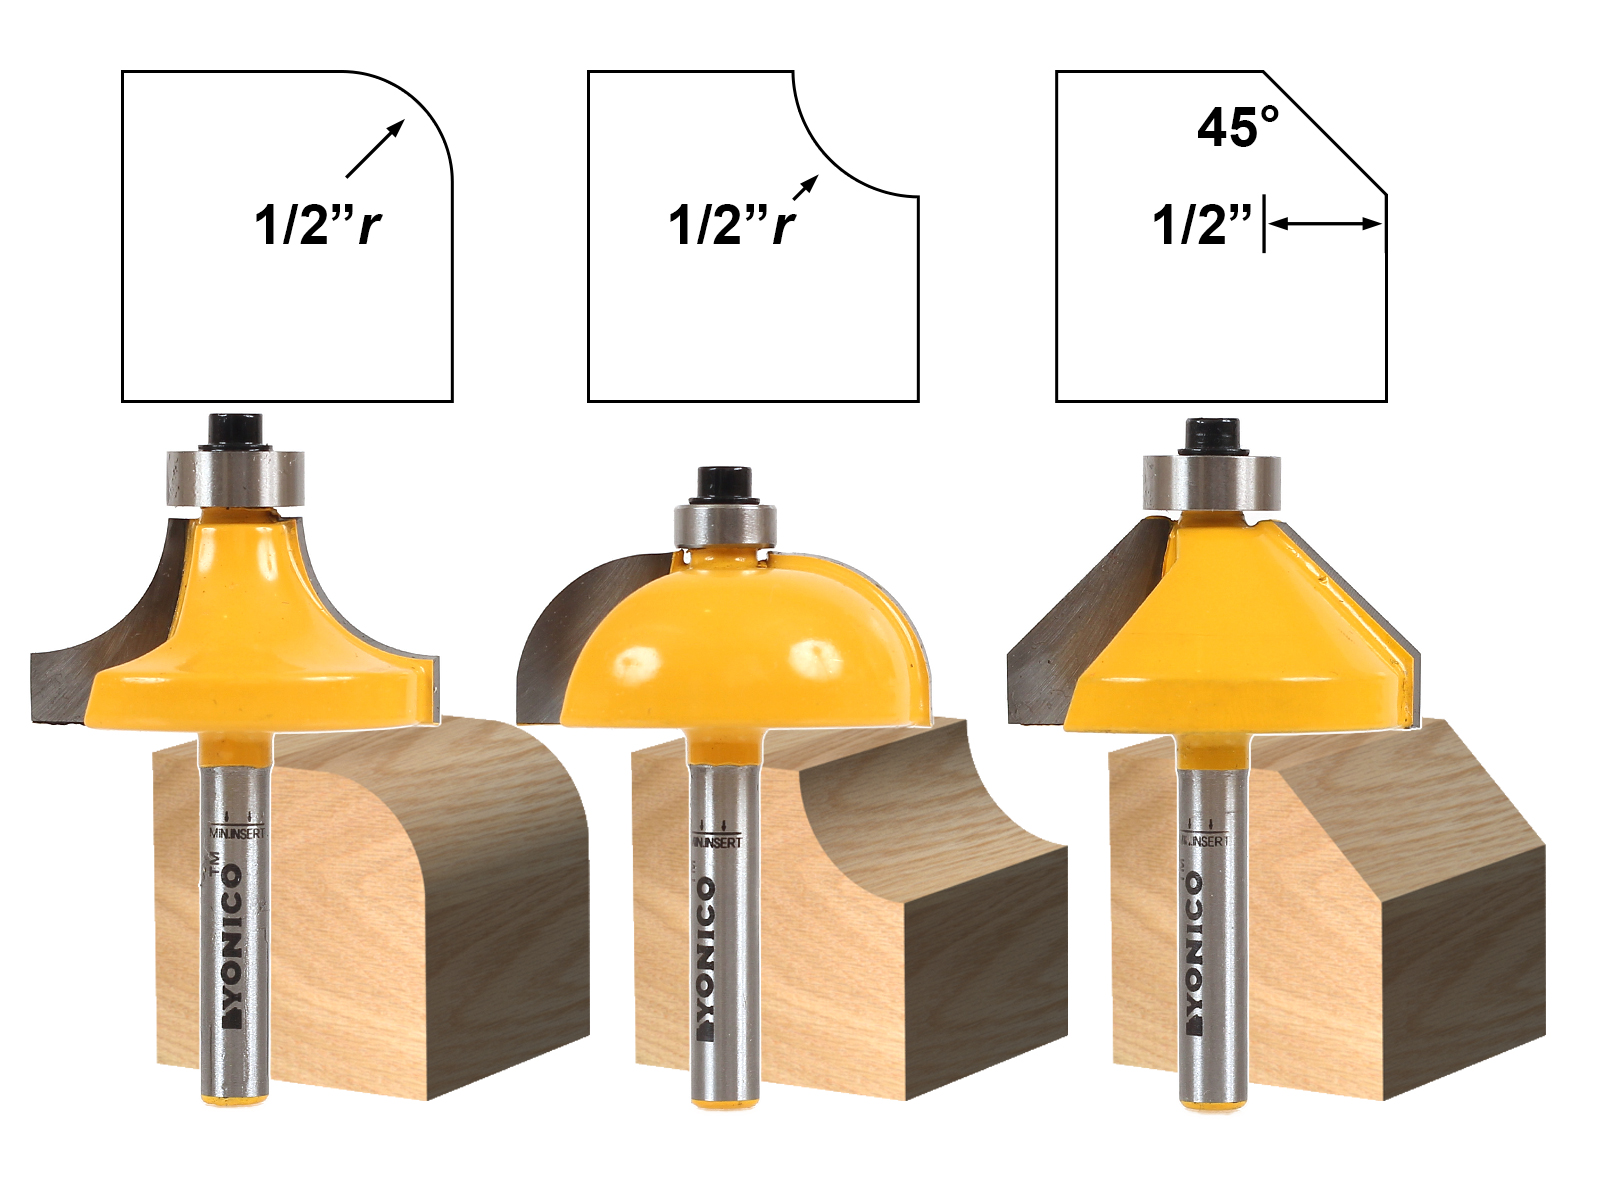 3 Bit Edging Router Bit Set - Large Round over Cove and Chamfer - Yonico  13312q